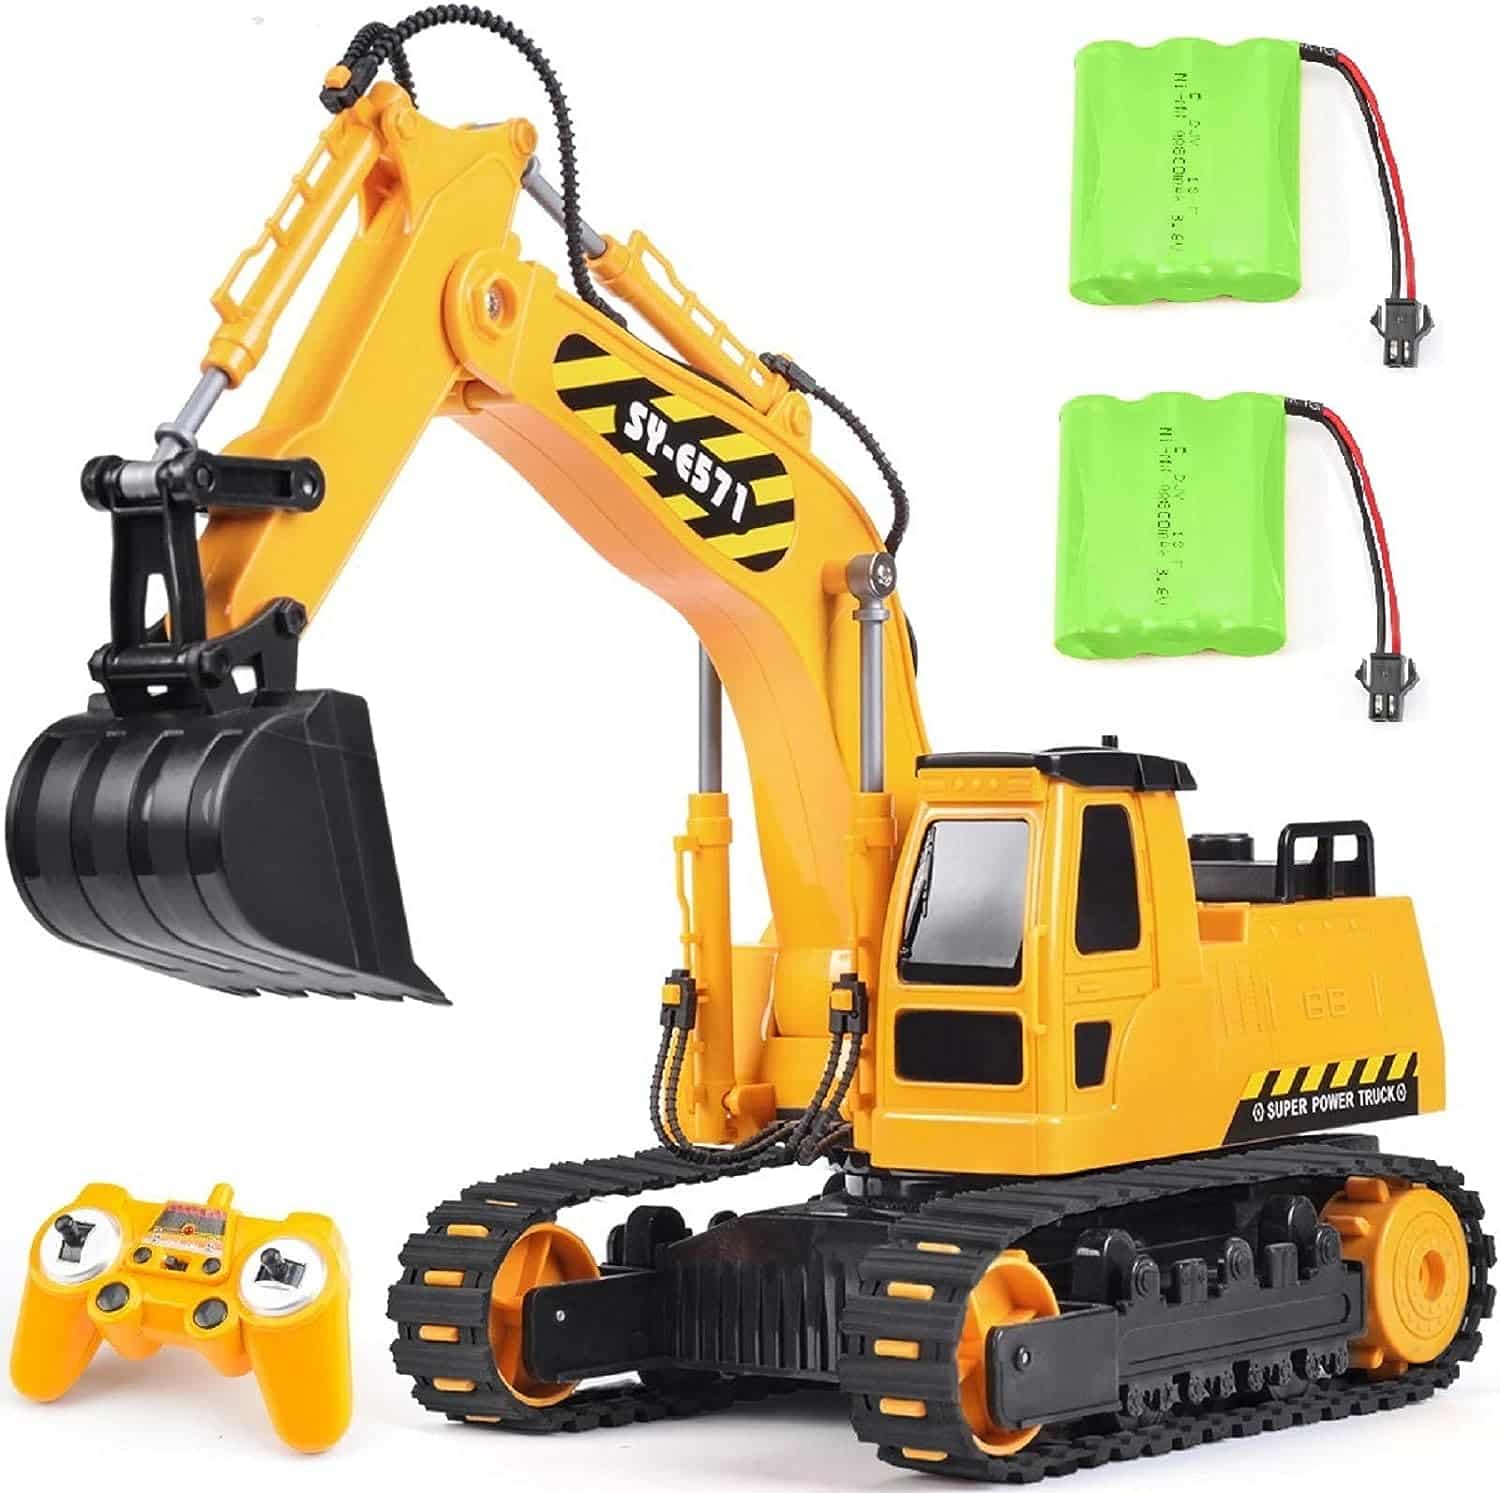 DOUBLE E Remote Control Excavator Toy: A Fun and Educational Construction Experience